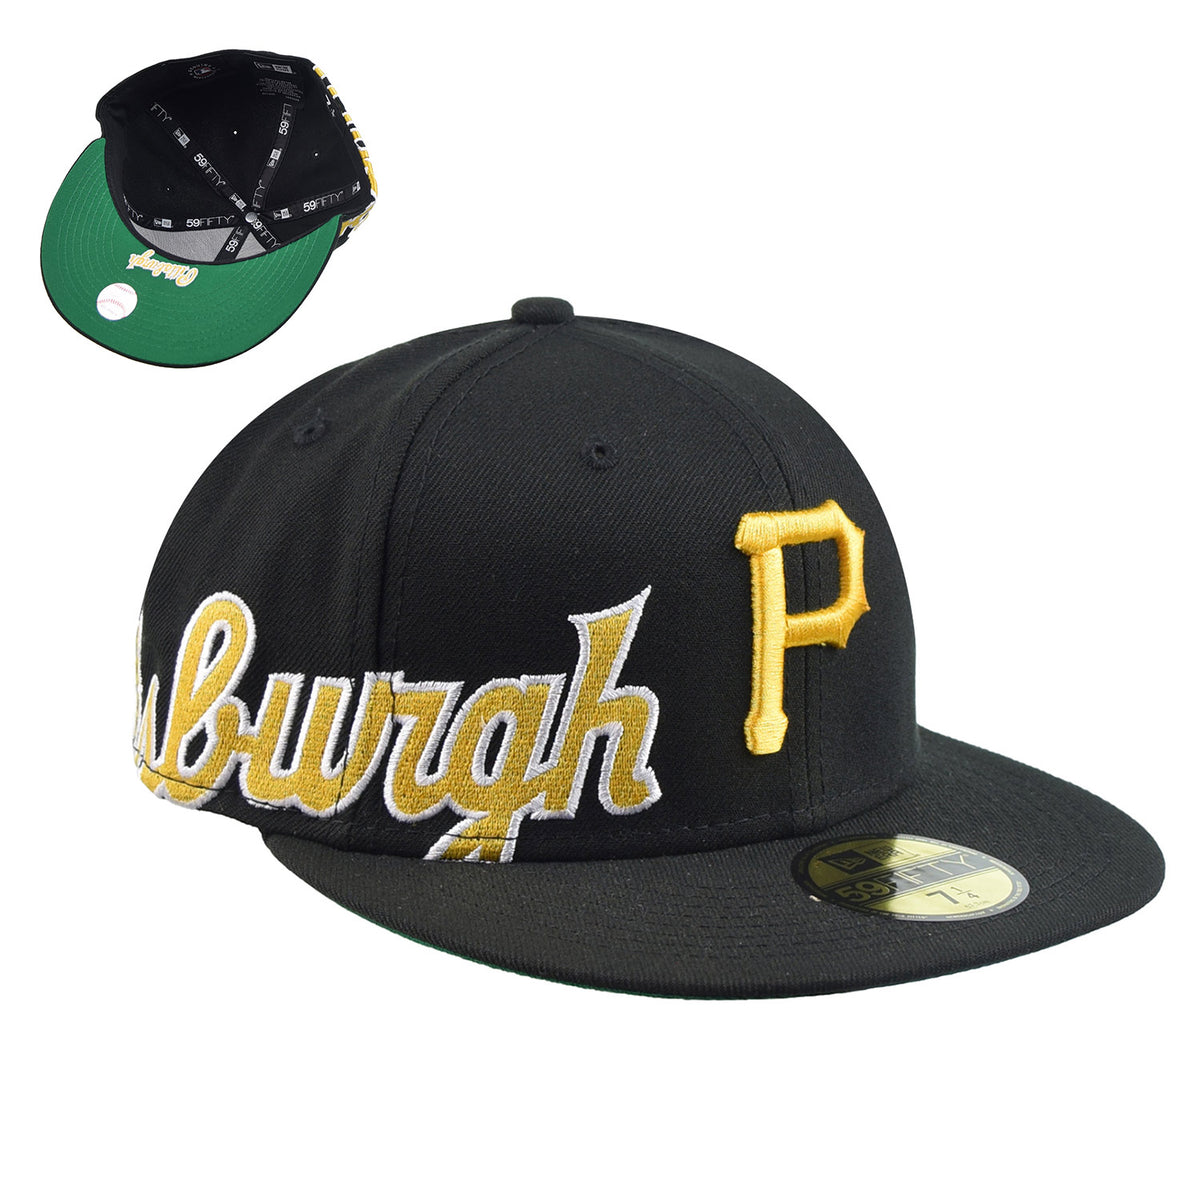 Men's Nike Black/Gold Pittsburgh Pirates Authentic Collection